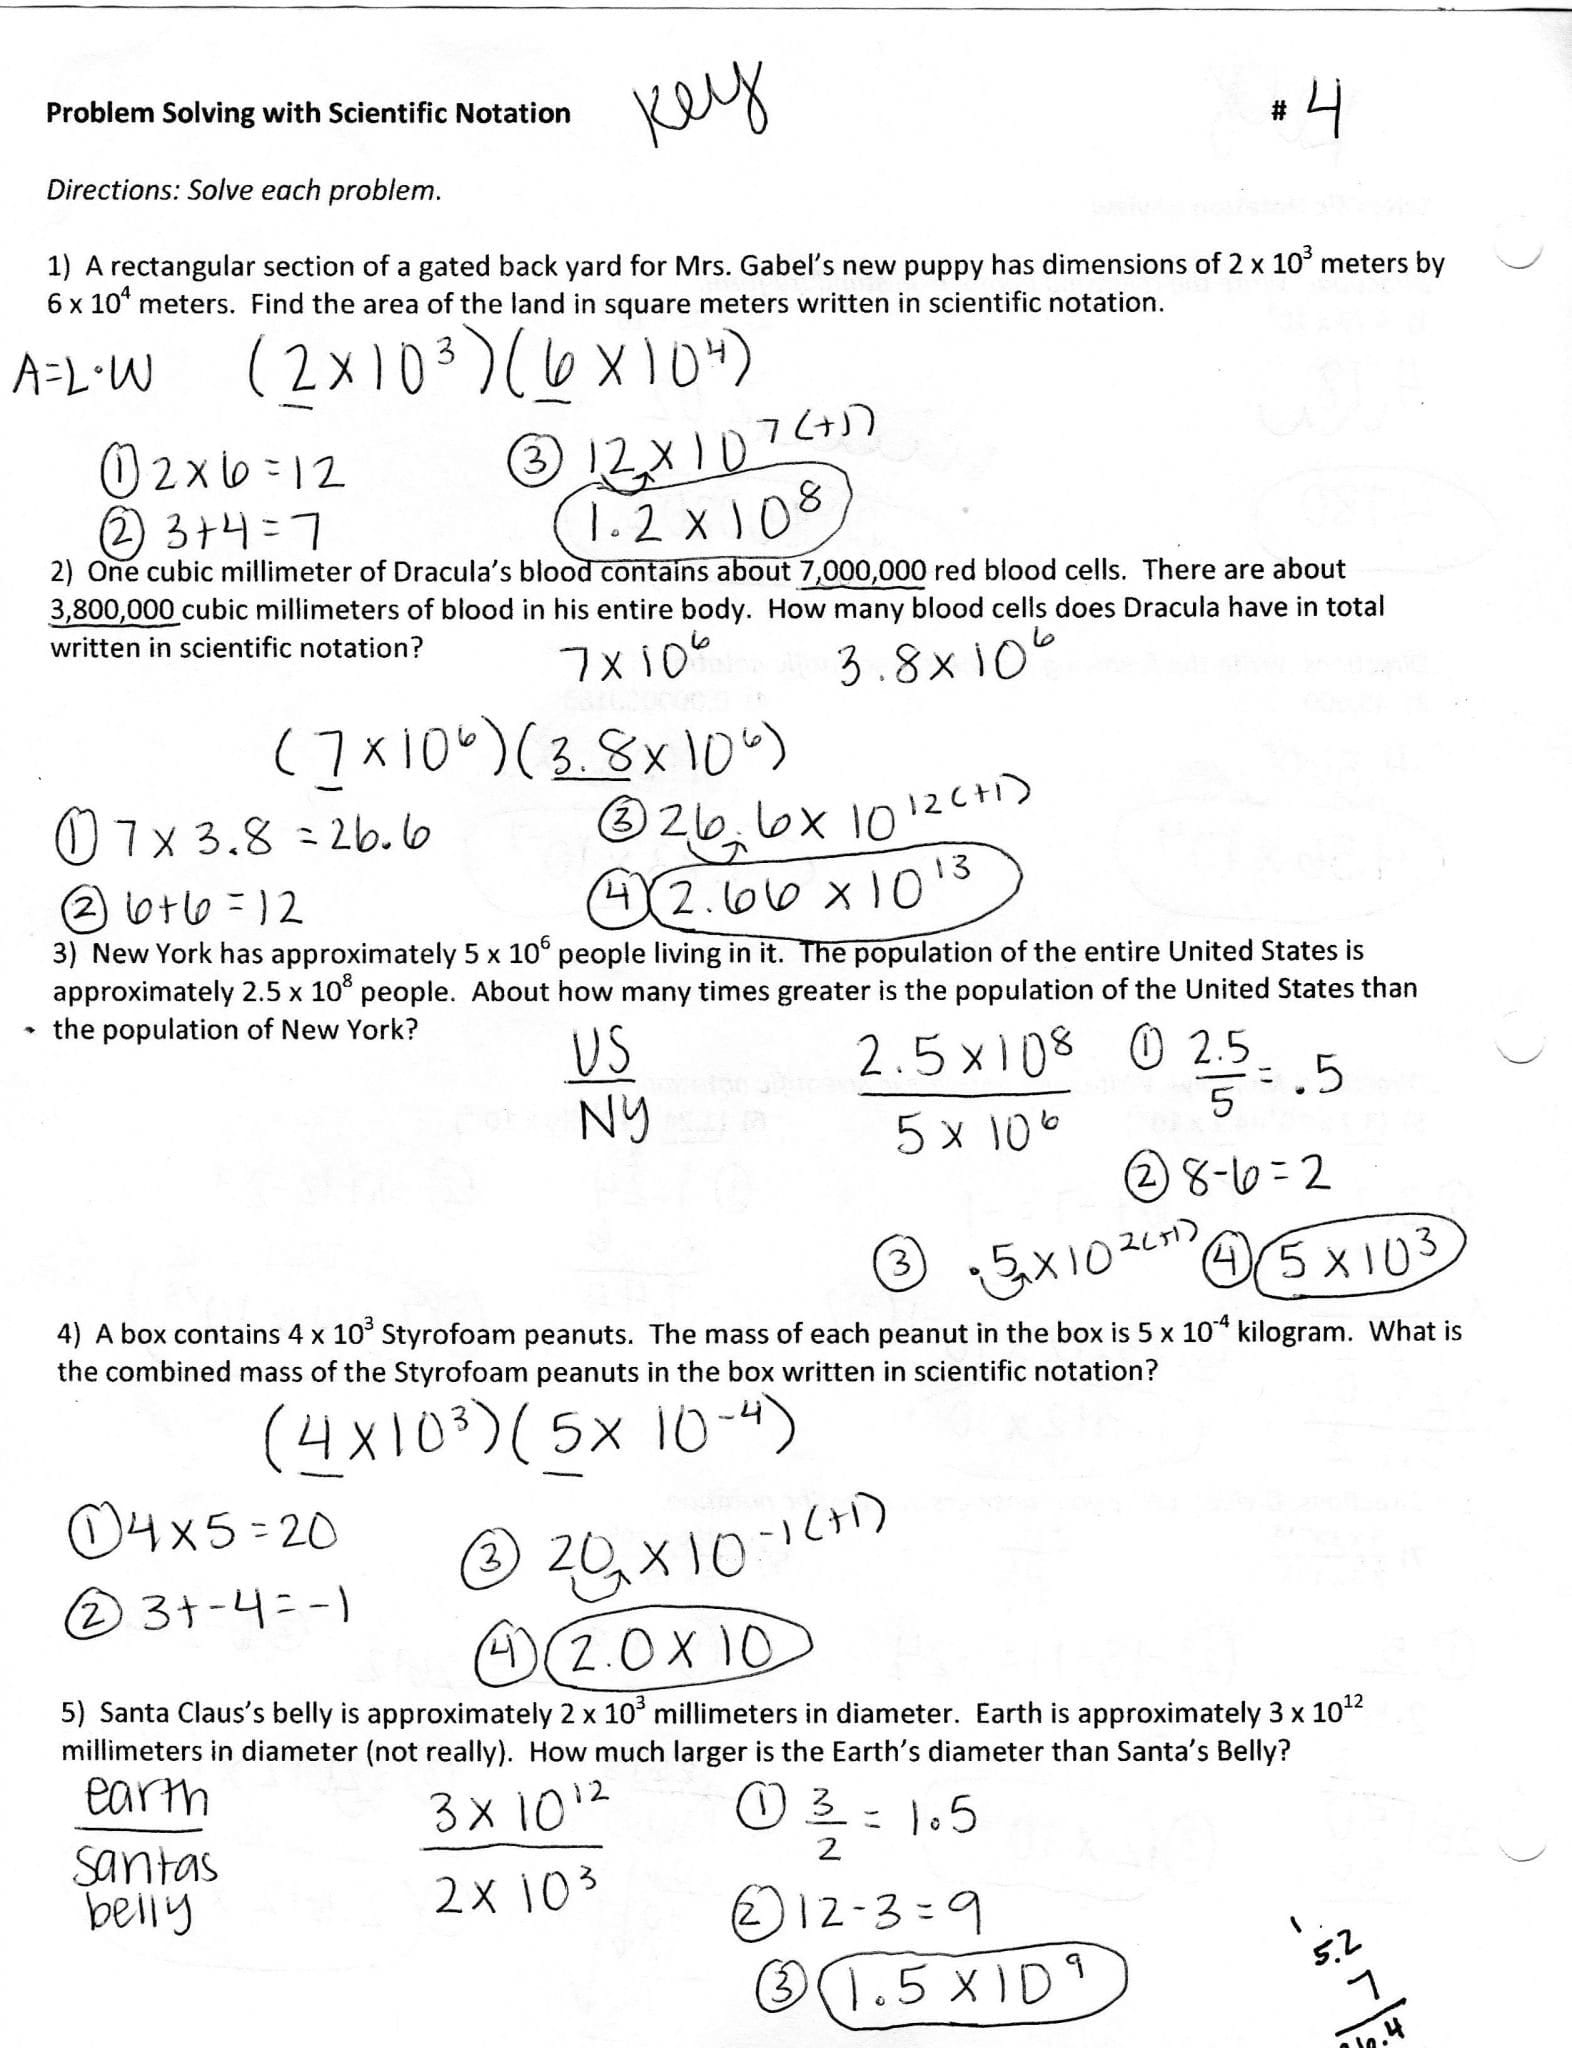 Scientific Notation And Standard Notation Worksheet Answers For Scientific Notation Word Problems Worksheet Pdf